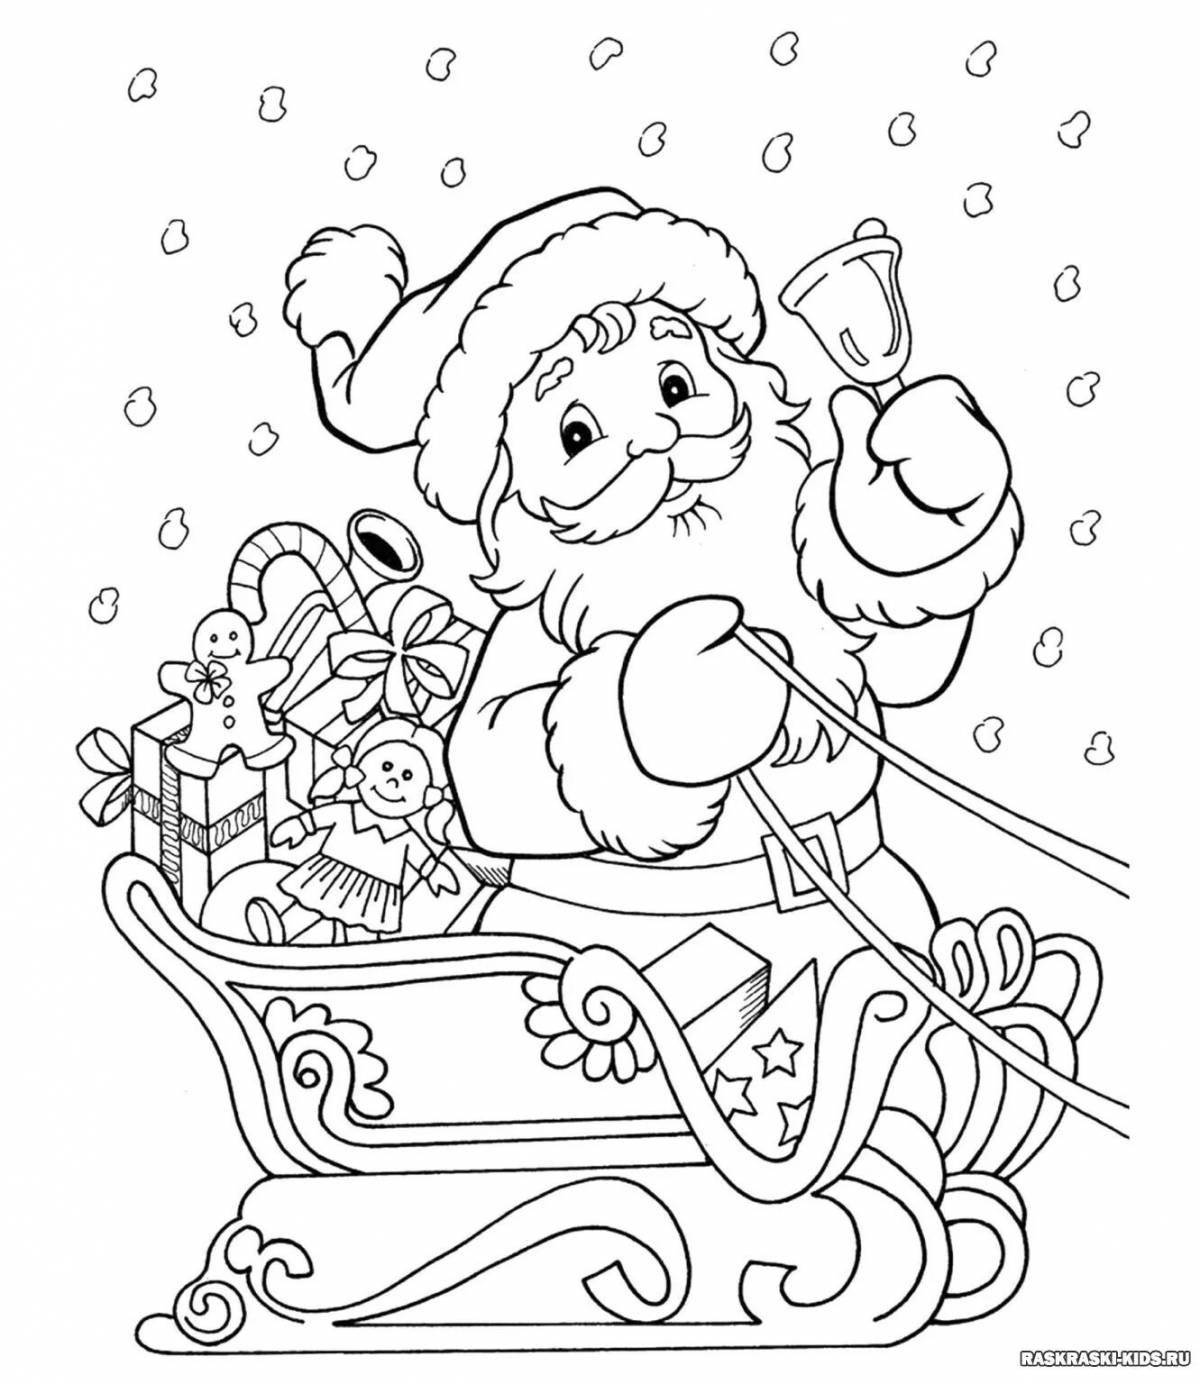 Coloring page witty santa claus for children 2-3 years old